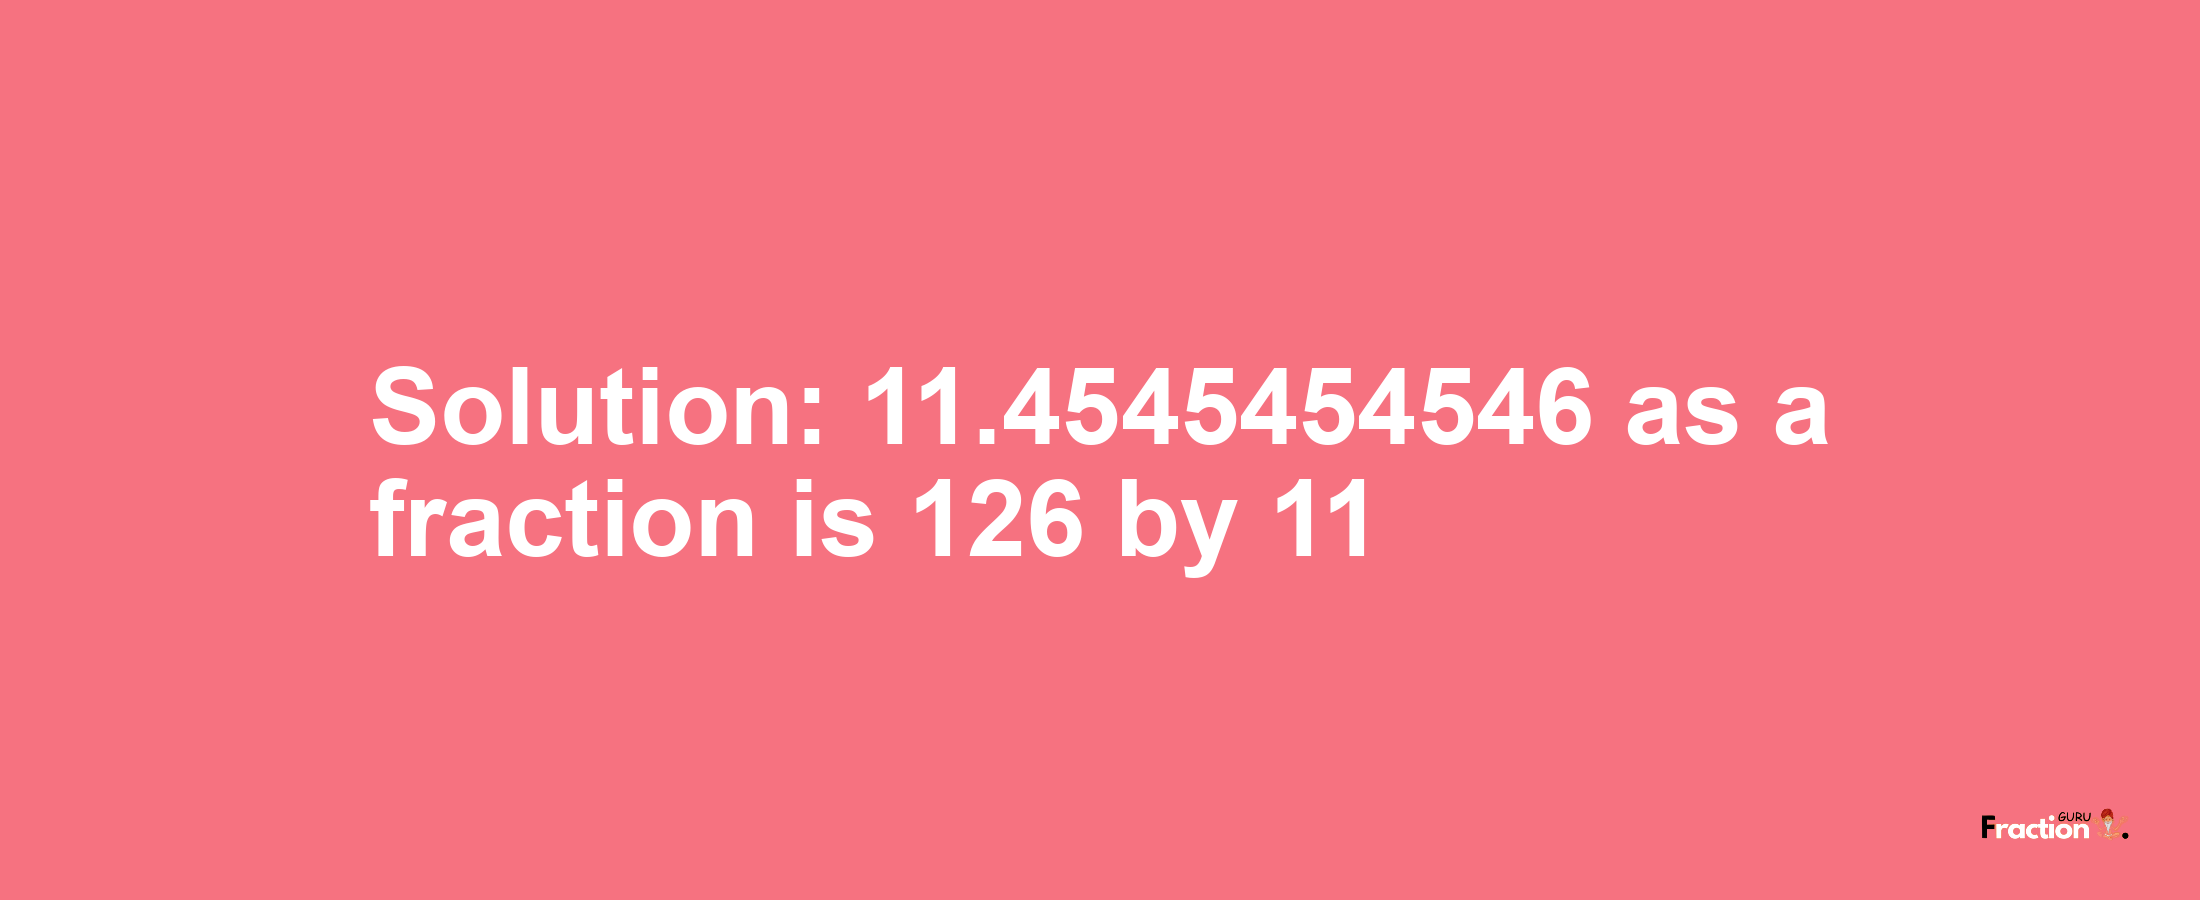 Solution:11.4545454546 as a fraction is 126/11